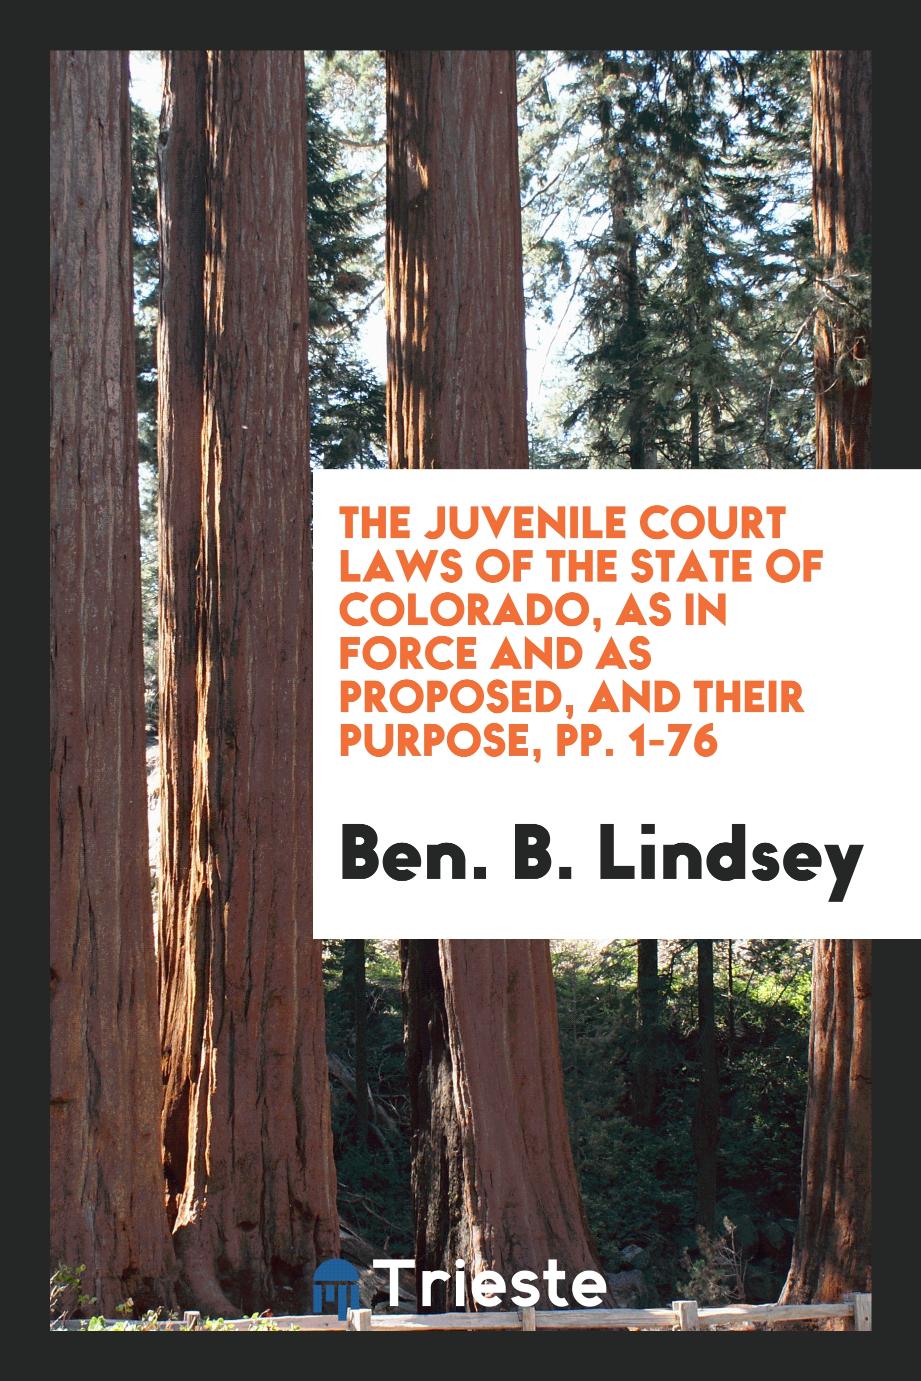 The Juvenile Court Laws of the State of Colorado, as in Force and as Proposed, and Their Purpose, pp. 1-76